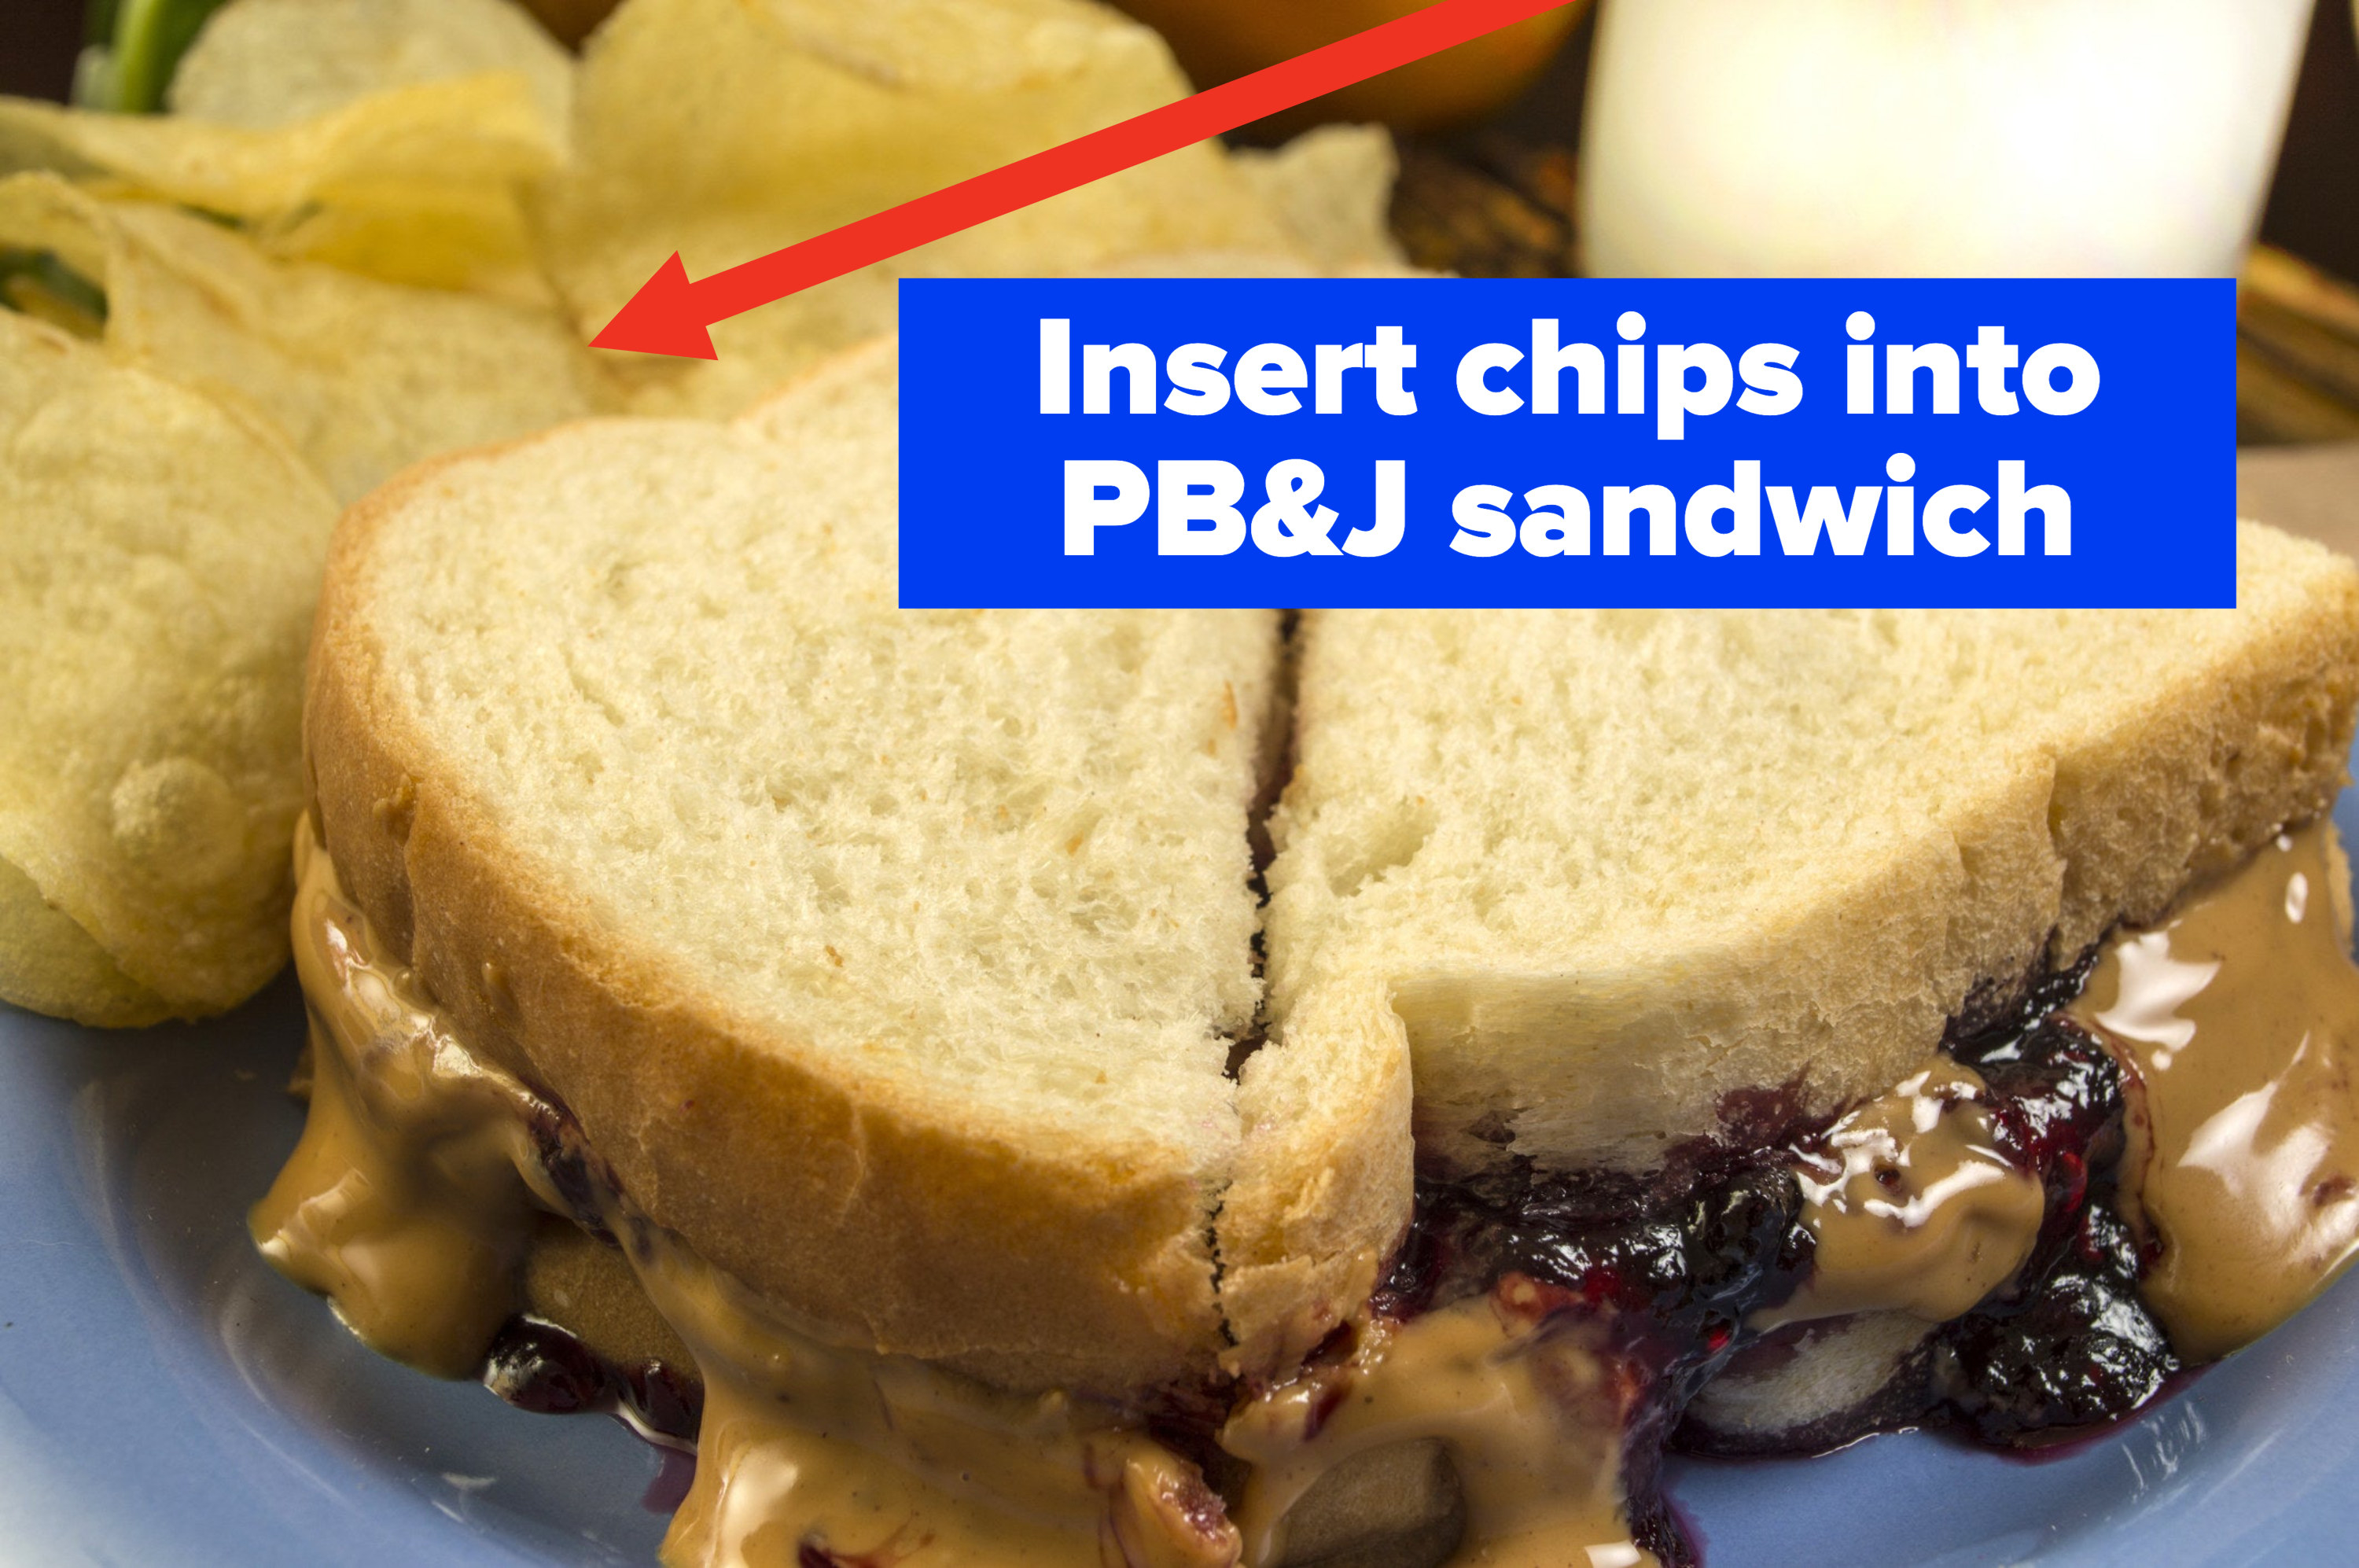 Peanut butter and jelly sandwich on a plate.